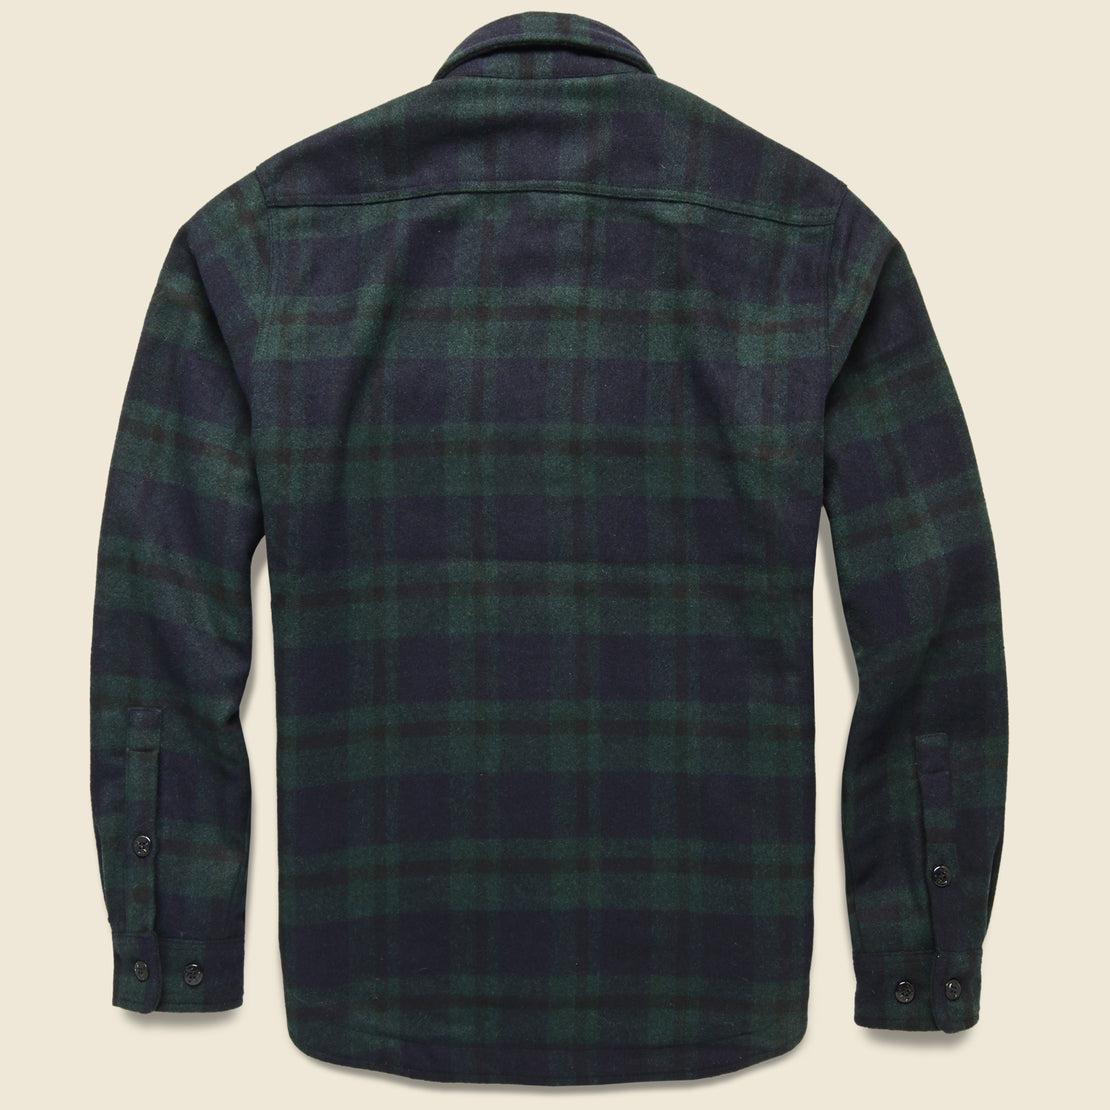 Quilt Lined CPO Shirt Jacket - Hunter Green Plaid - Schott - STAG Provisions - Outerwear - Coat / Jacket